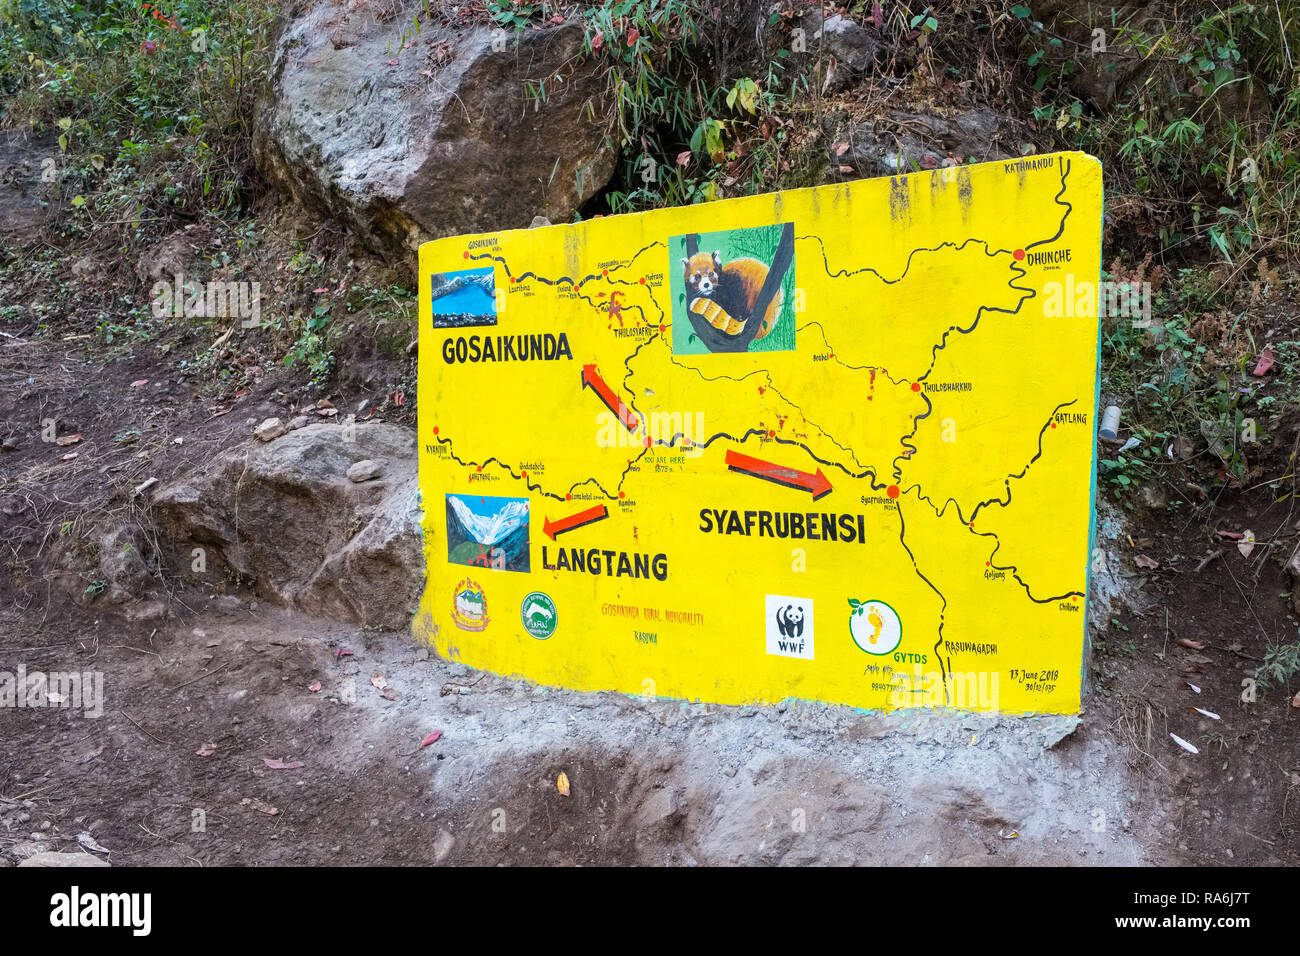 Trail side map showing the Langtang and Gosaikunda treks in the Nepal Himalayas Stock Photo